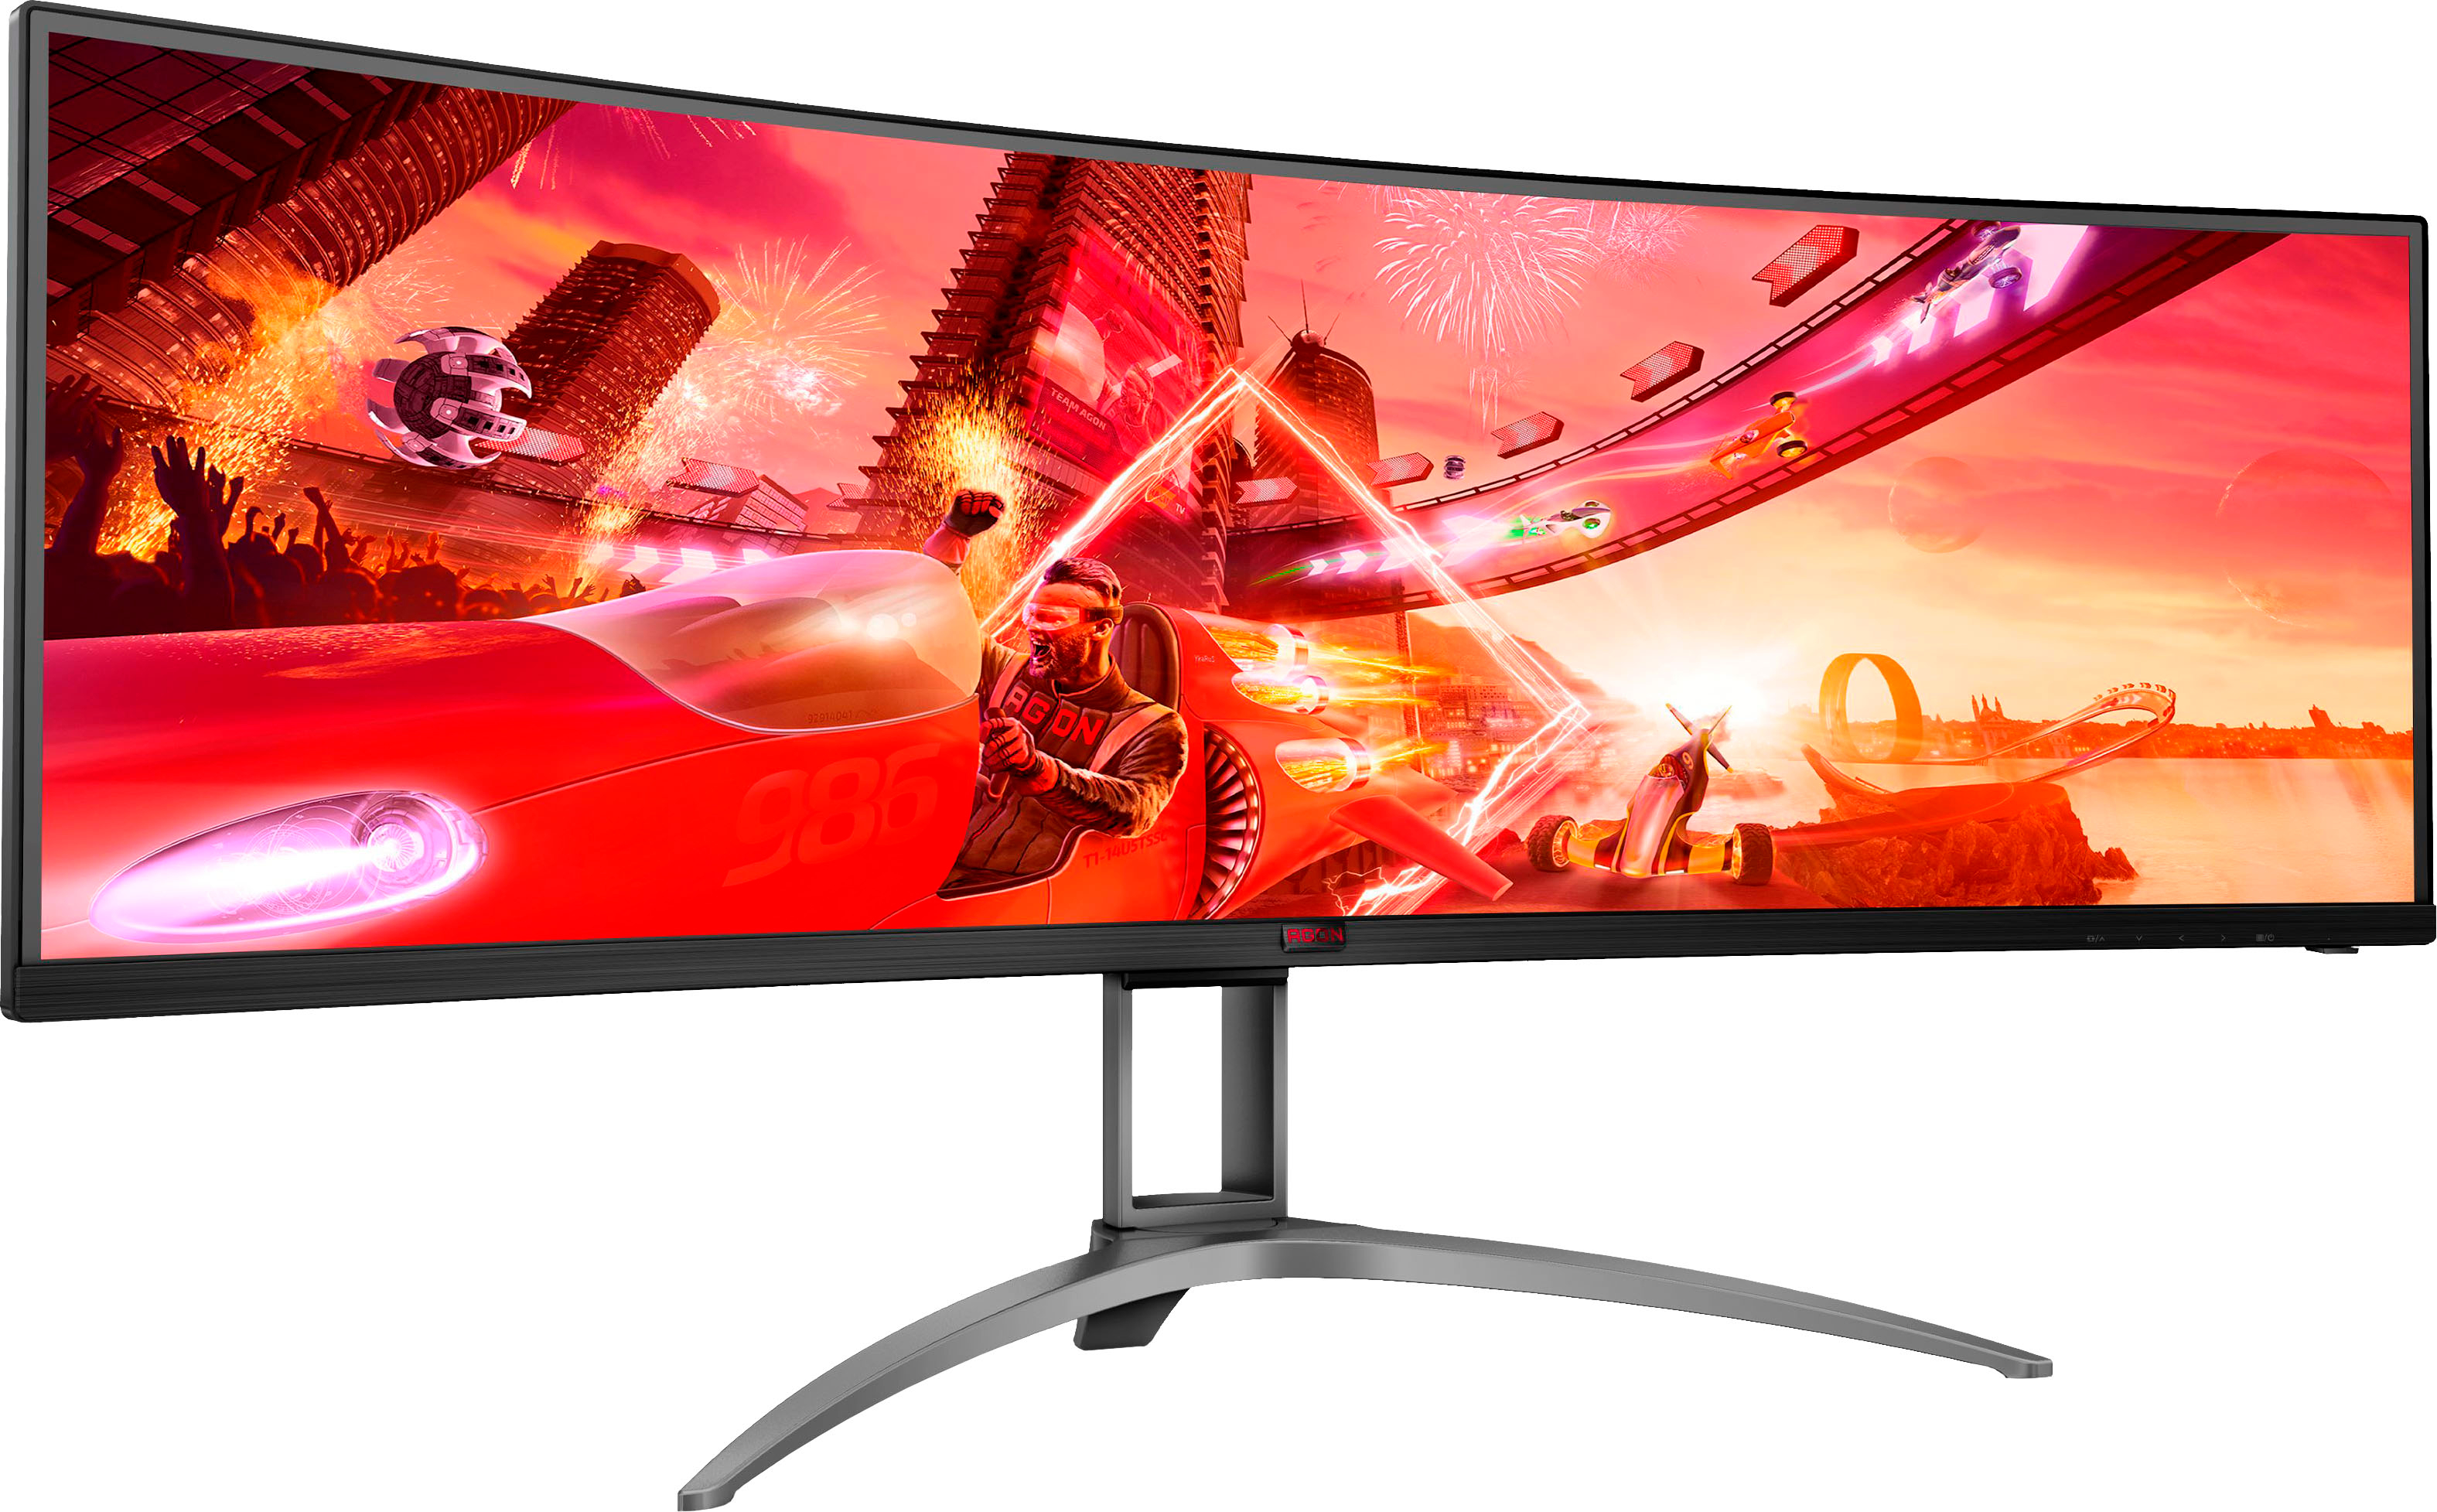 Left View: AOC - AG493UCX2 49" LCD 4K UWHD Gaming Monitor - Black/Red